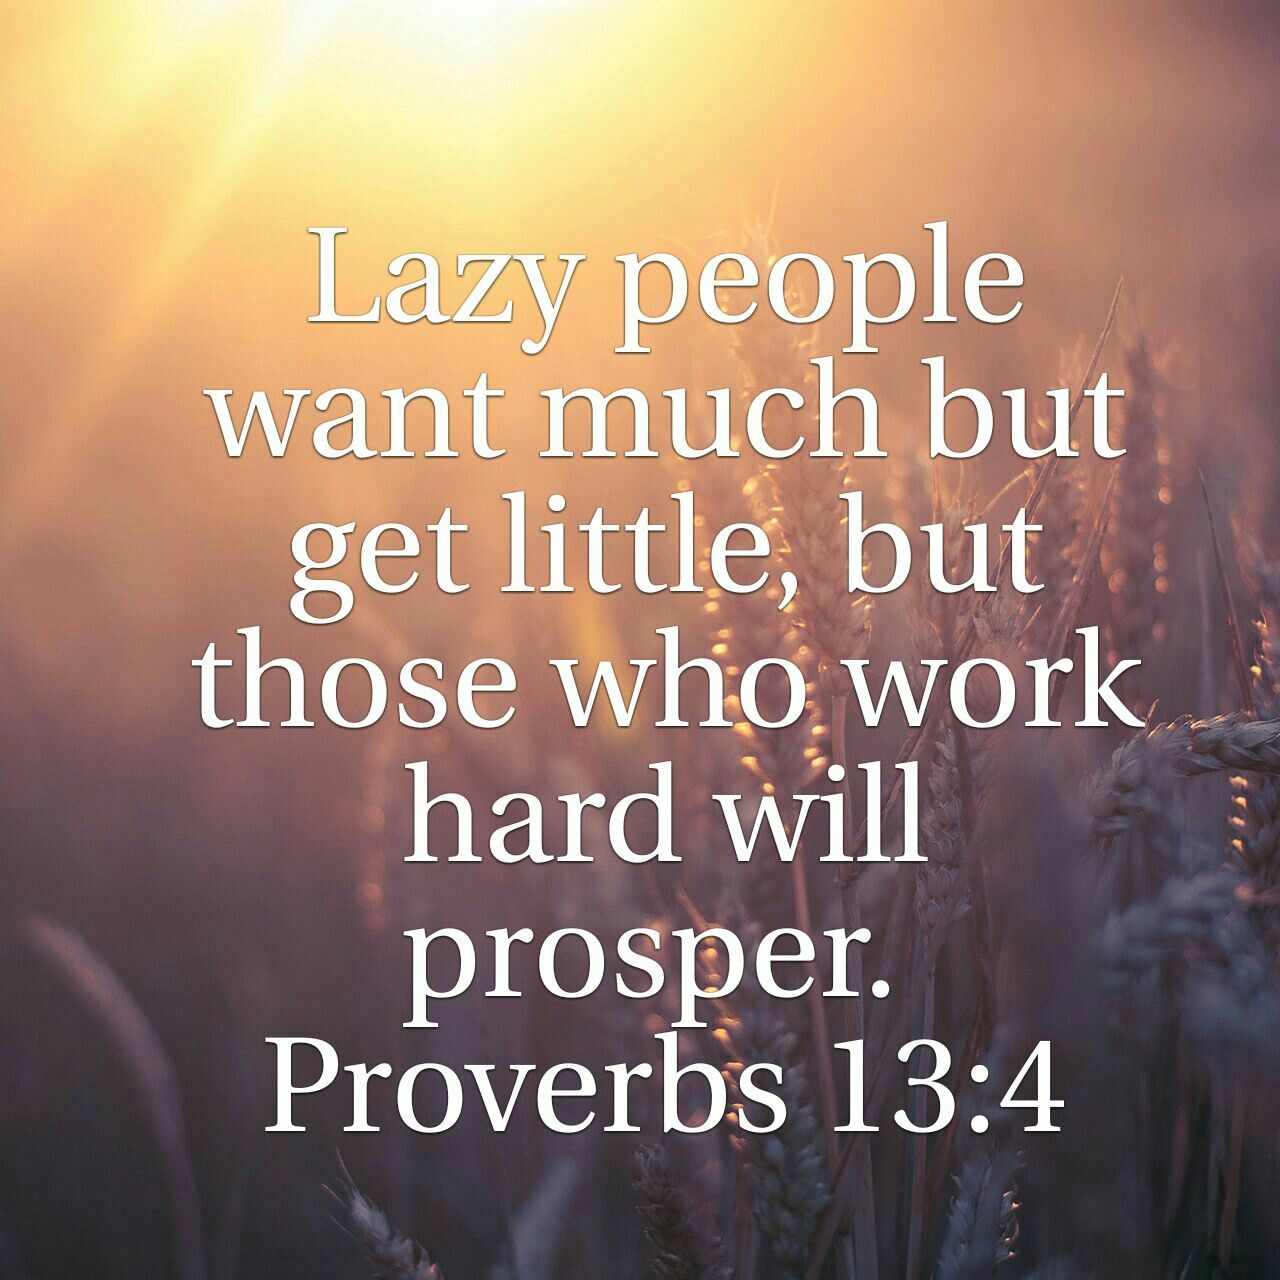 Bible Verse Images for: Working hard and not being lazy